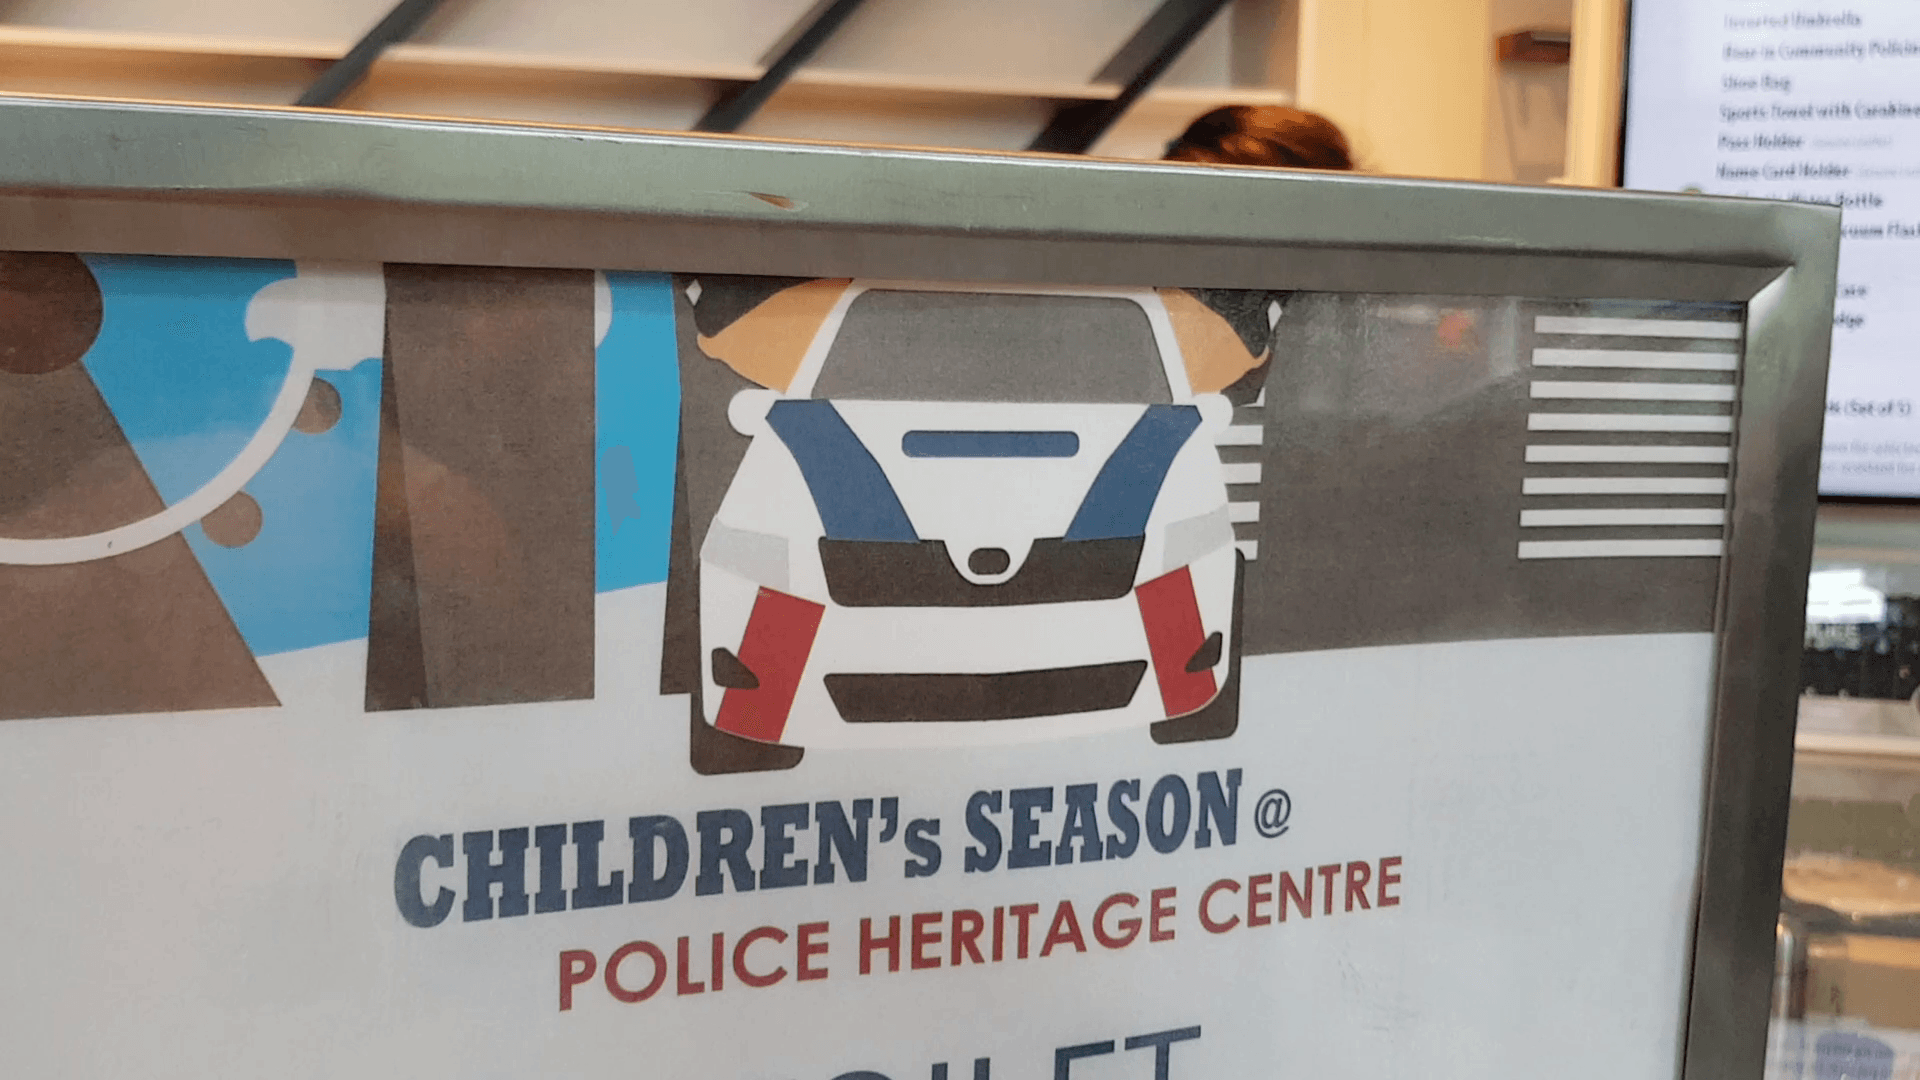 BYKidO Visits: The Children's Season Police Heritage Centre Tour